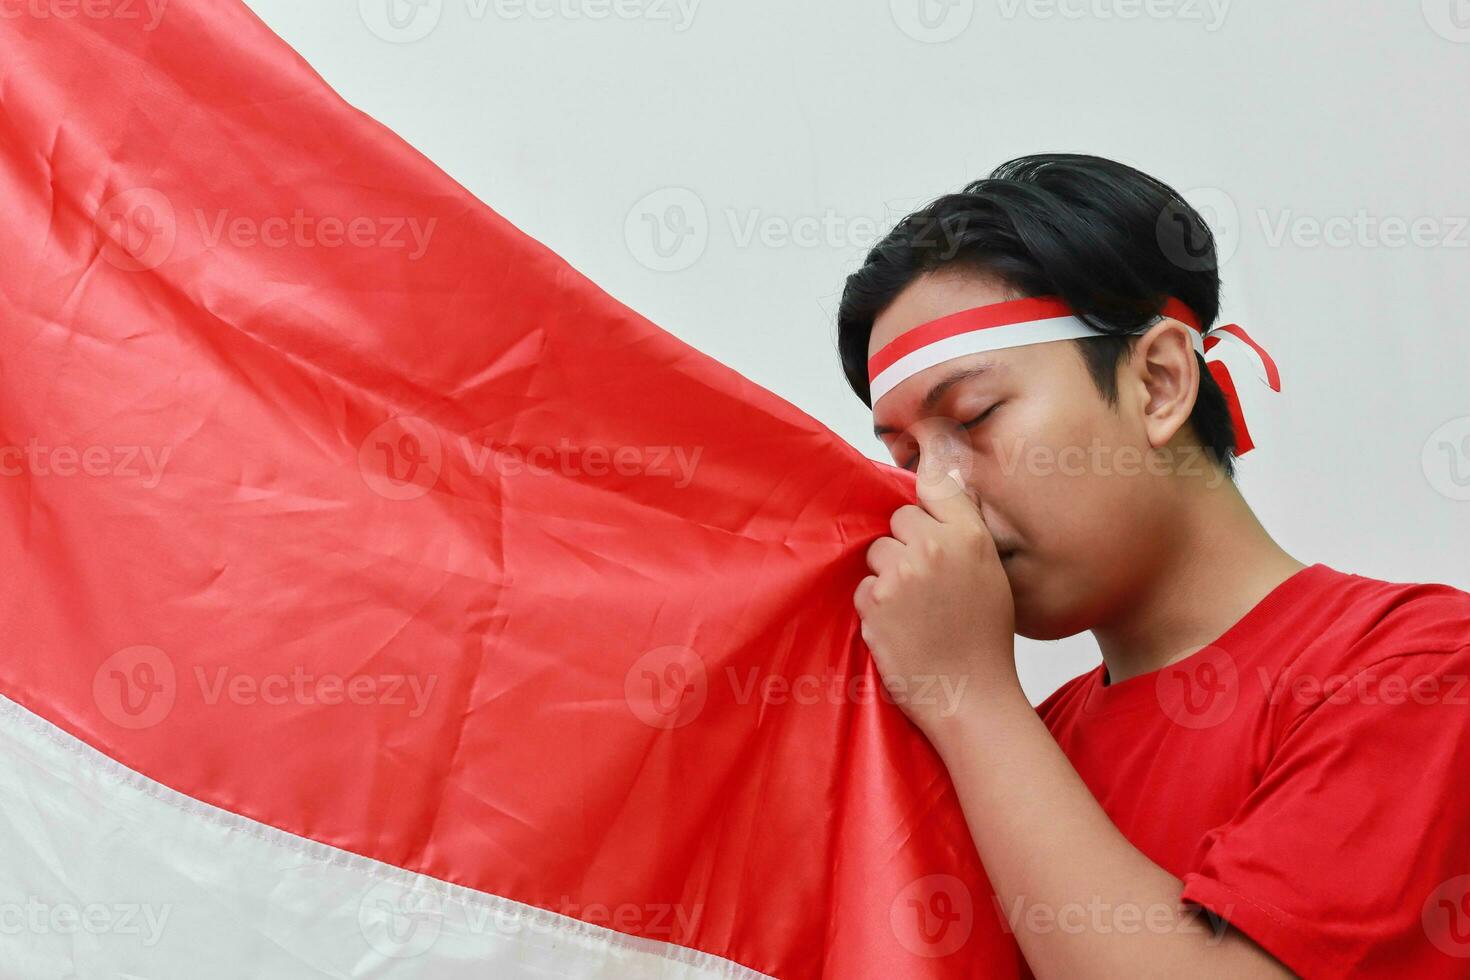 Portrait of respectful Asian man in t-shirt with headband ribbon on head, kissing red and white flag of Indonesia. Isolated image on gray background photo